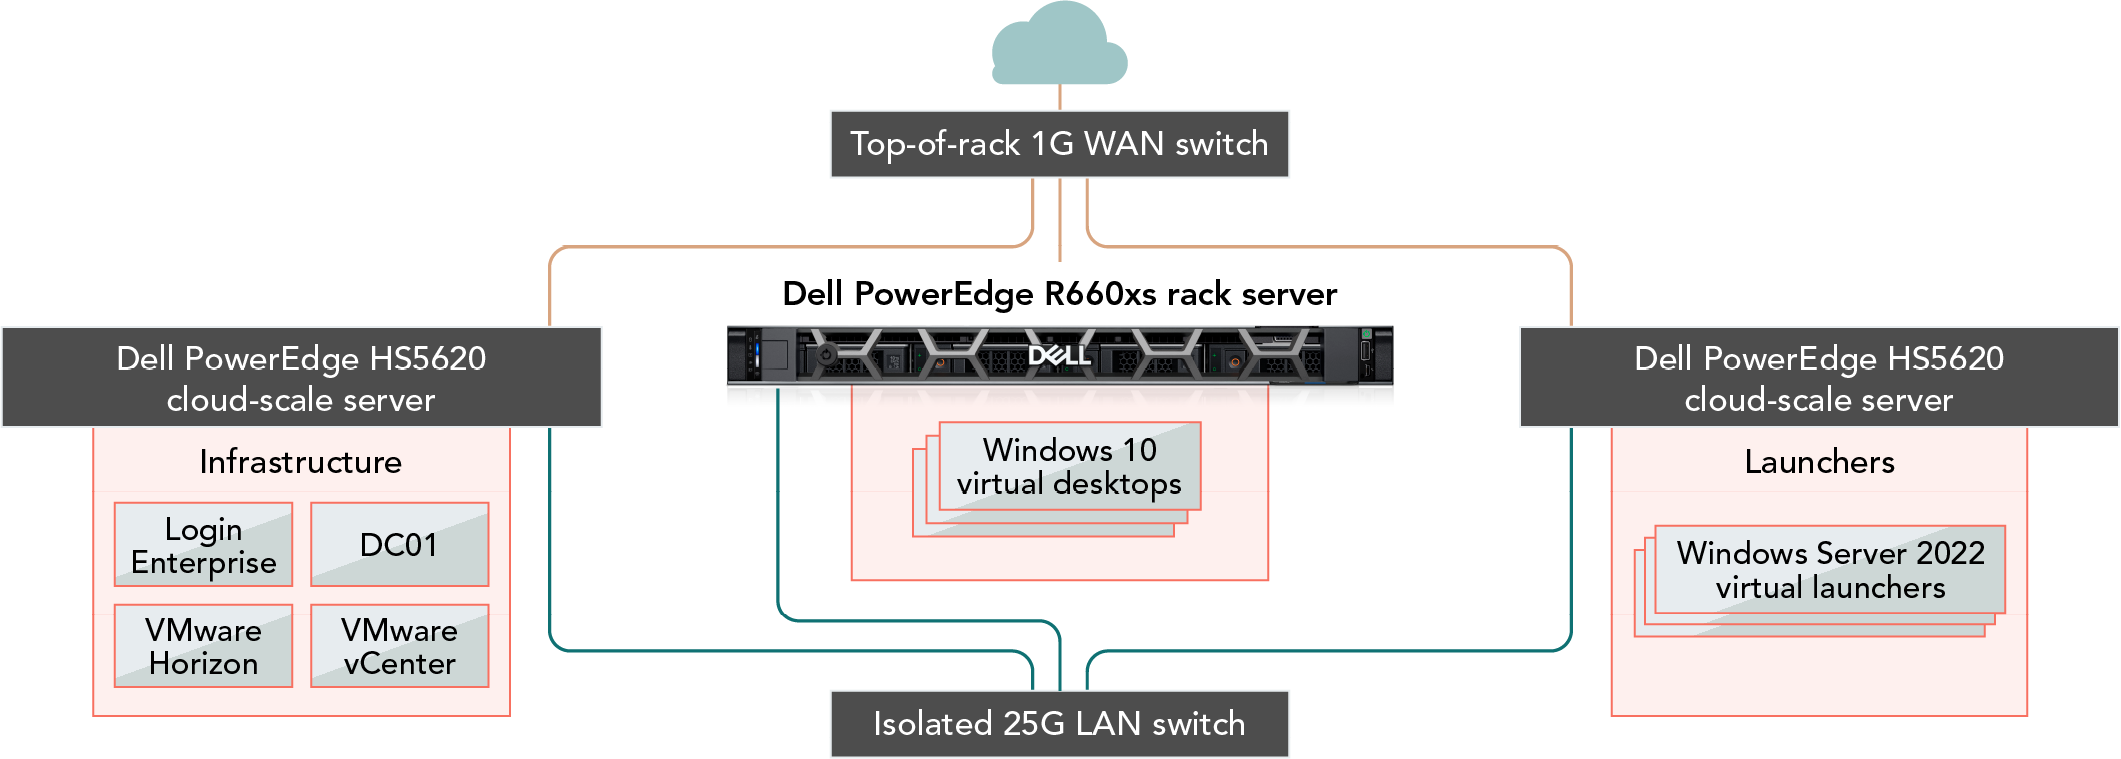 Diagram showing the PT testbed setup. Dell PowerEdge H55620 cloud-scale server infrastructure contains Login Enterprise, DC01, VMware Horizon, and VMware vCenter components and is connected to top-of-rack 1G WAN switch and isolated 25G LAN switch. Dell PowerEdge R660xs rack server contains Windows 10 virtual desktops and is connected to top-of-rack 1G WAN switch and isolated 25G LAN switch. Dell PowerEdge H55620 cloud-scale server launcher that contains Windows Server 2022 virtual launchers and is connected to top-of-rack 1G WAN switch and isolated 25G LAN switch.